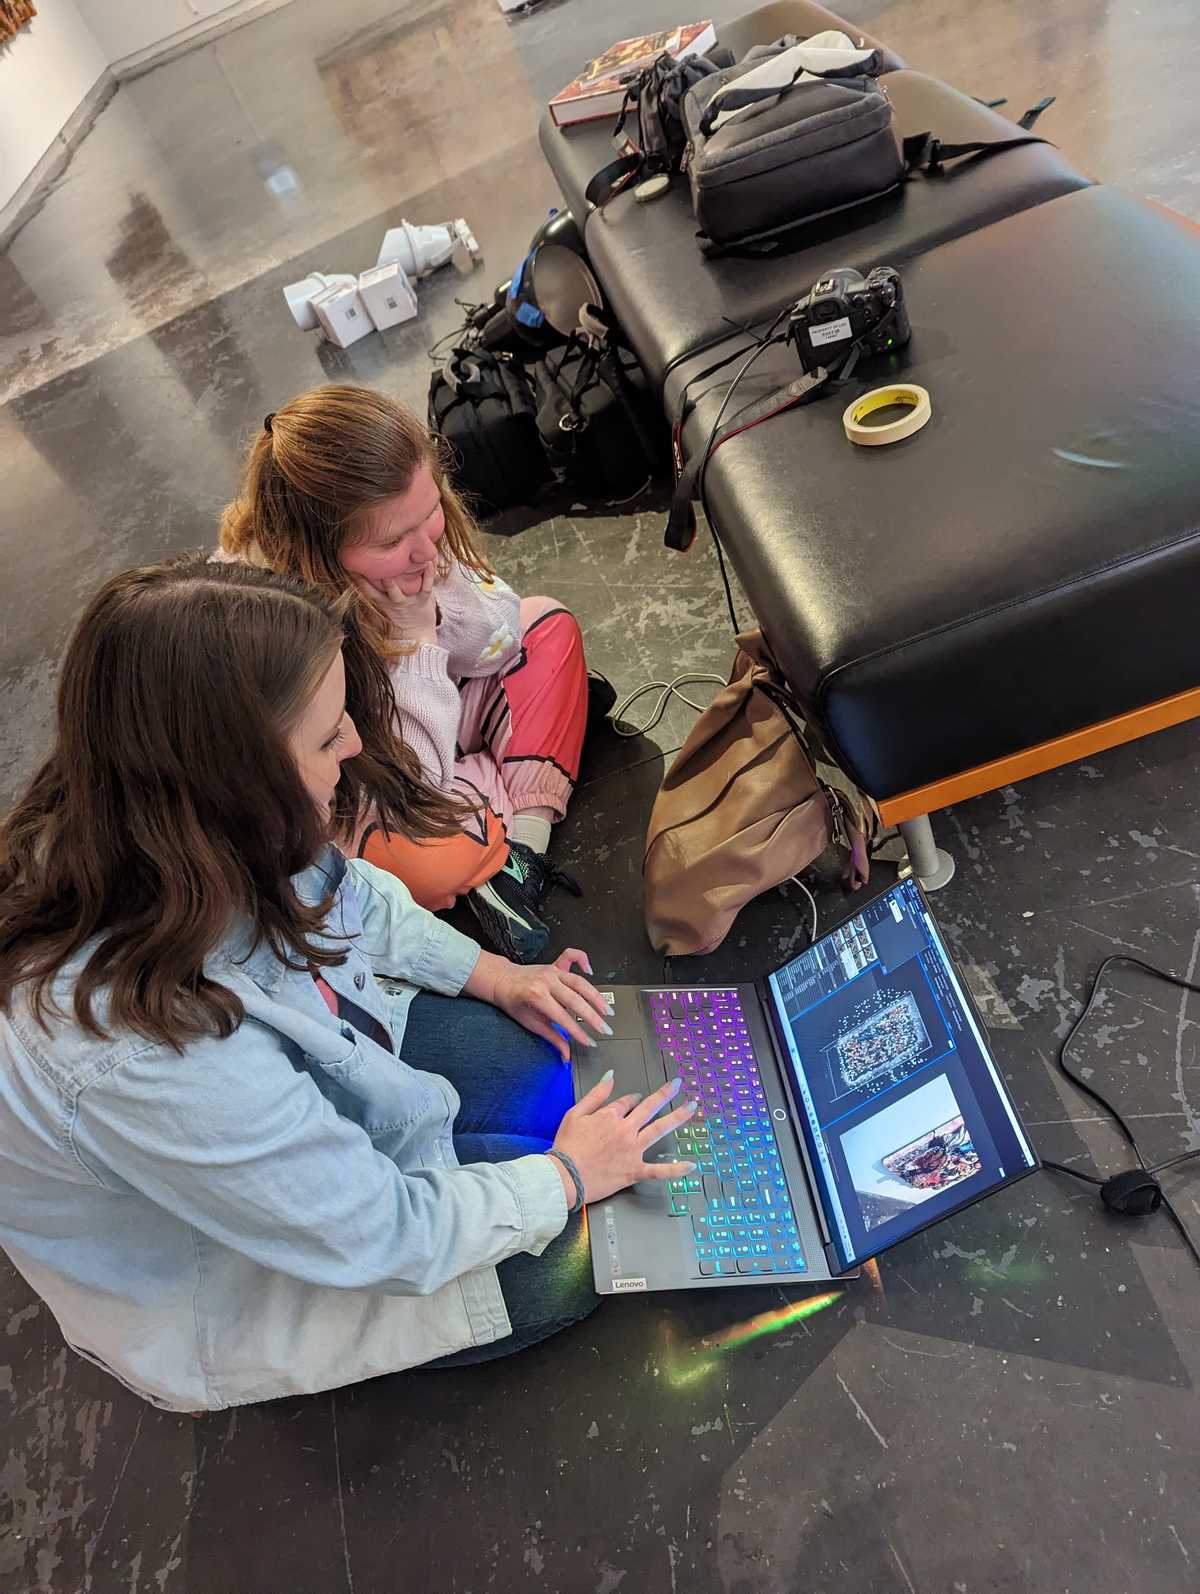 lsu students working on laptop